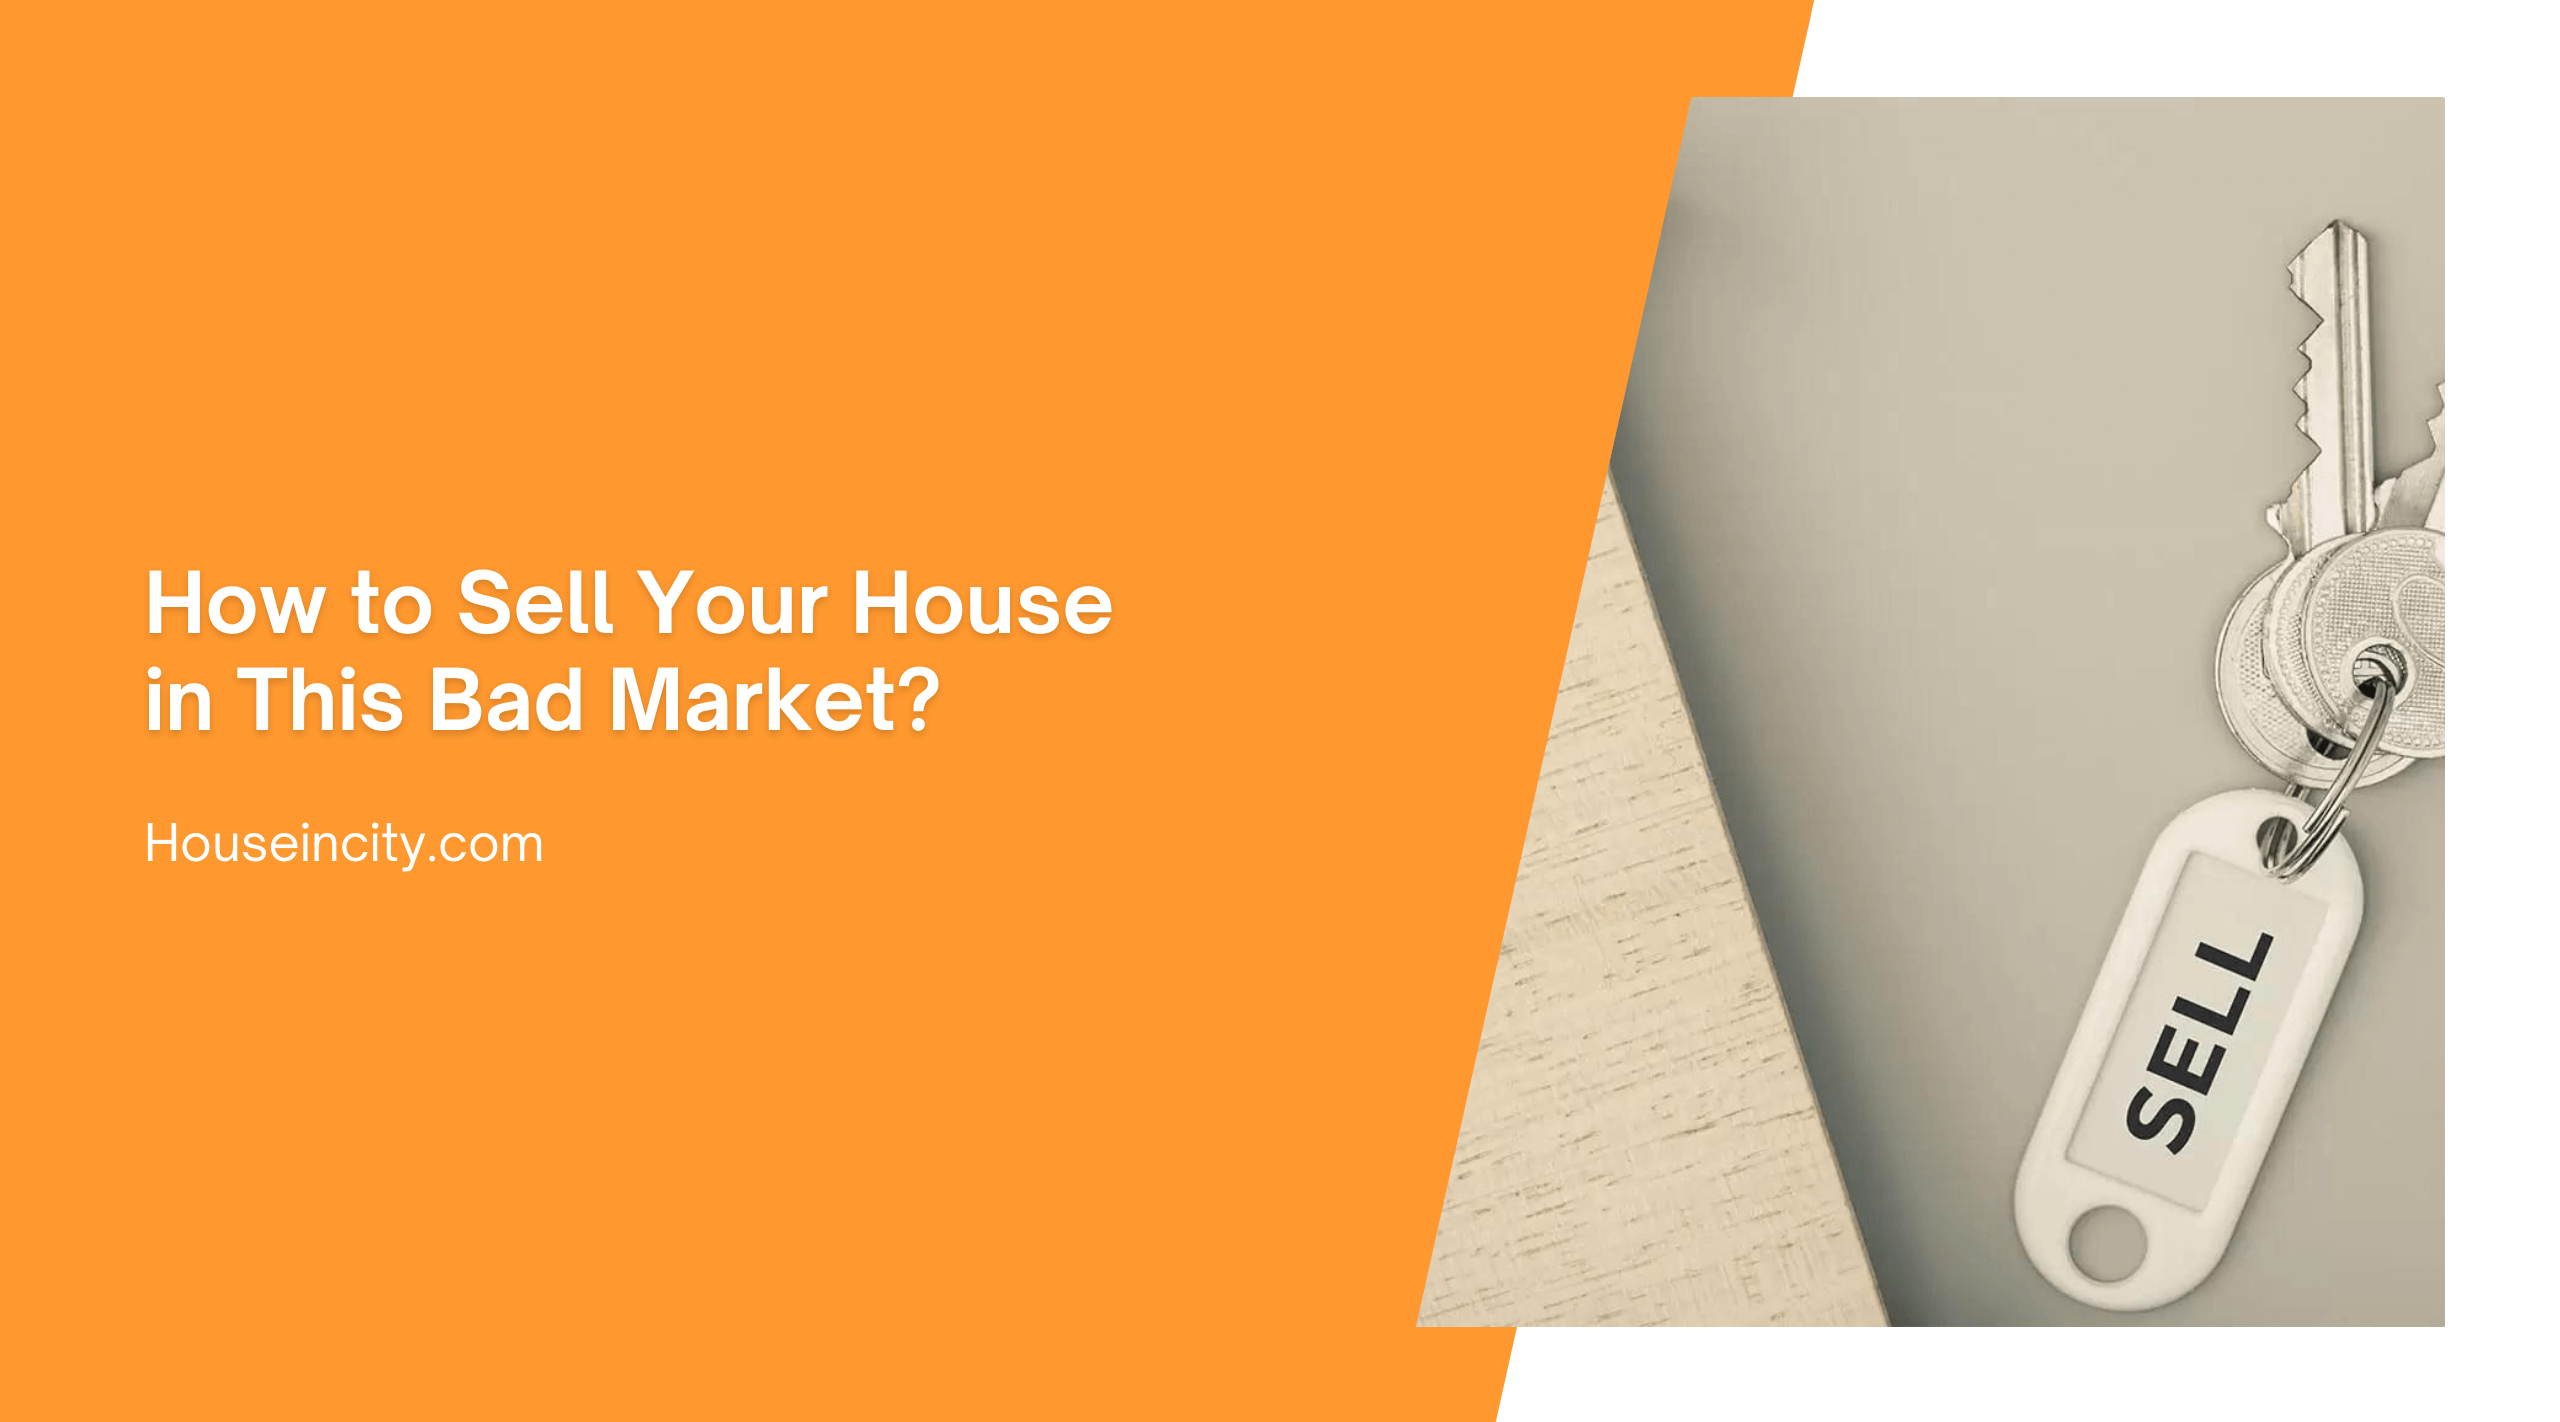 How to Sell Your House in This Bad Market?